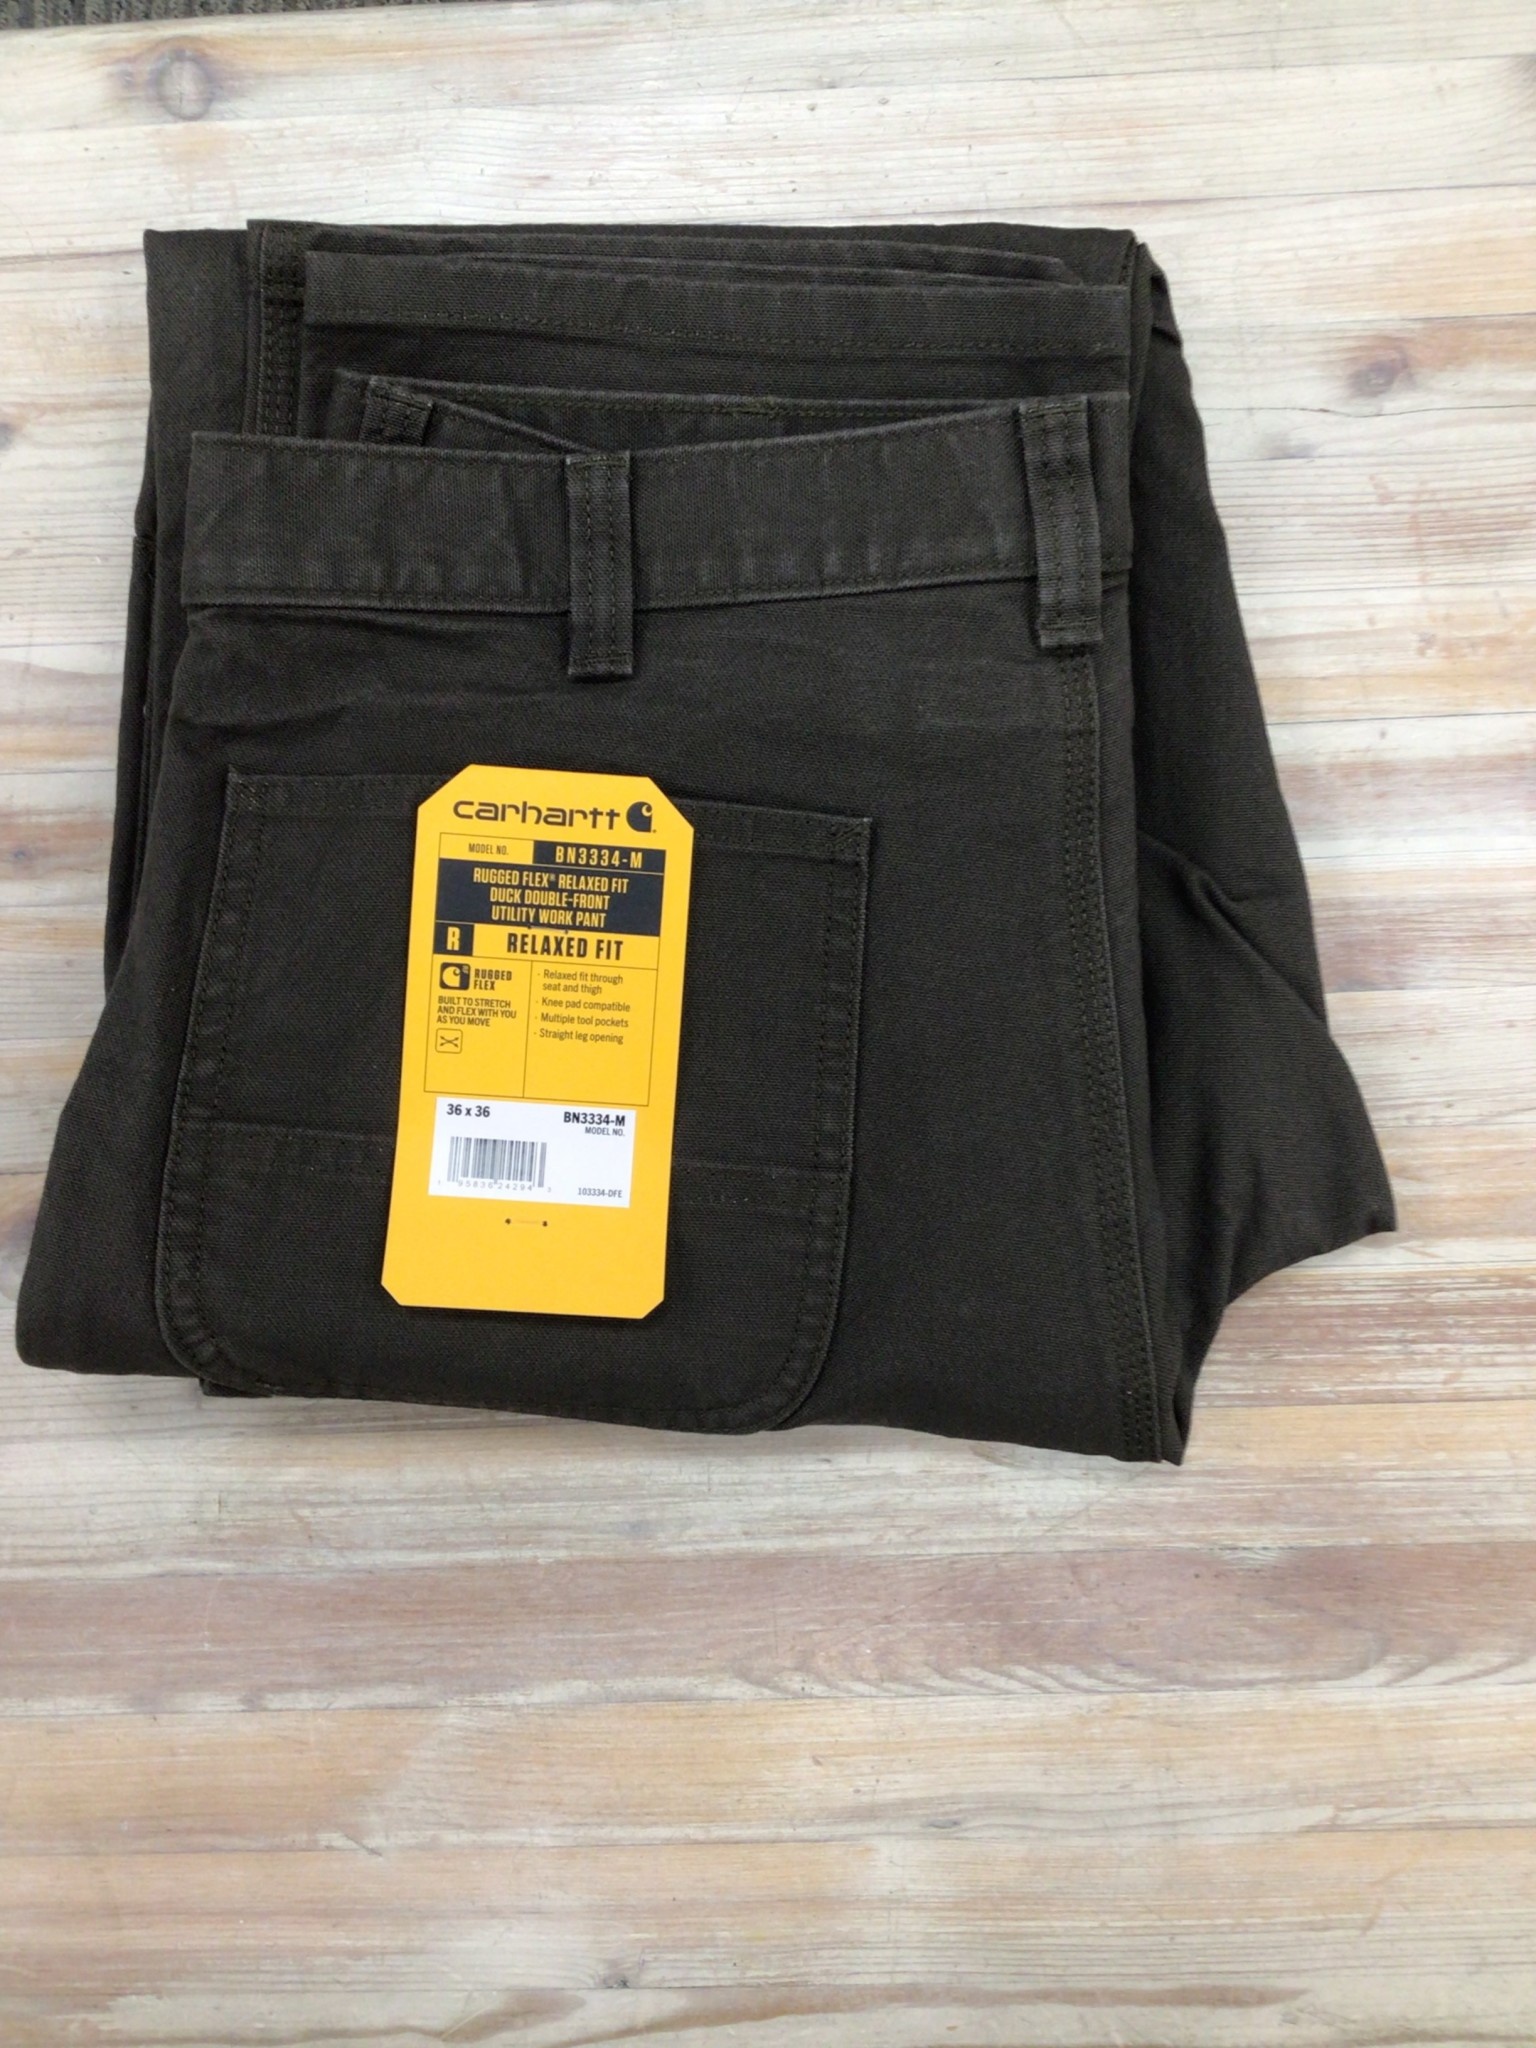 Carhartt 103334 Rugged Flex Relaxed Fit Duck Double-Front Utility Work Pant  Men’s